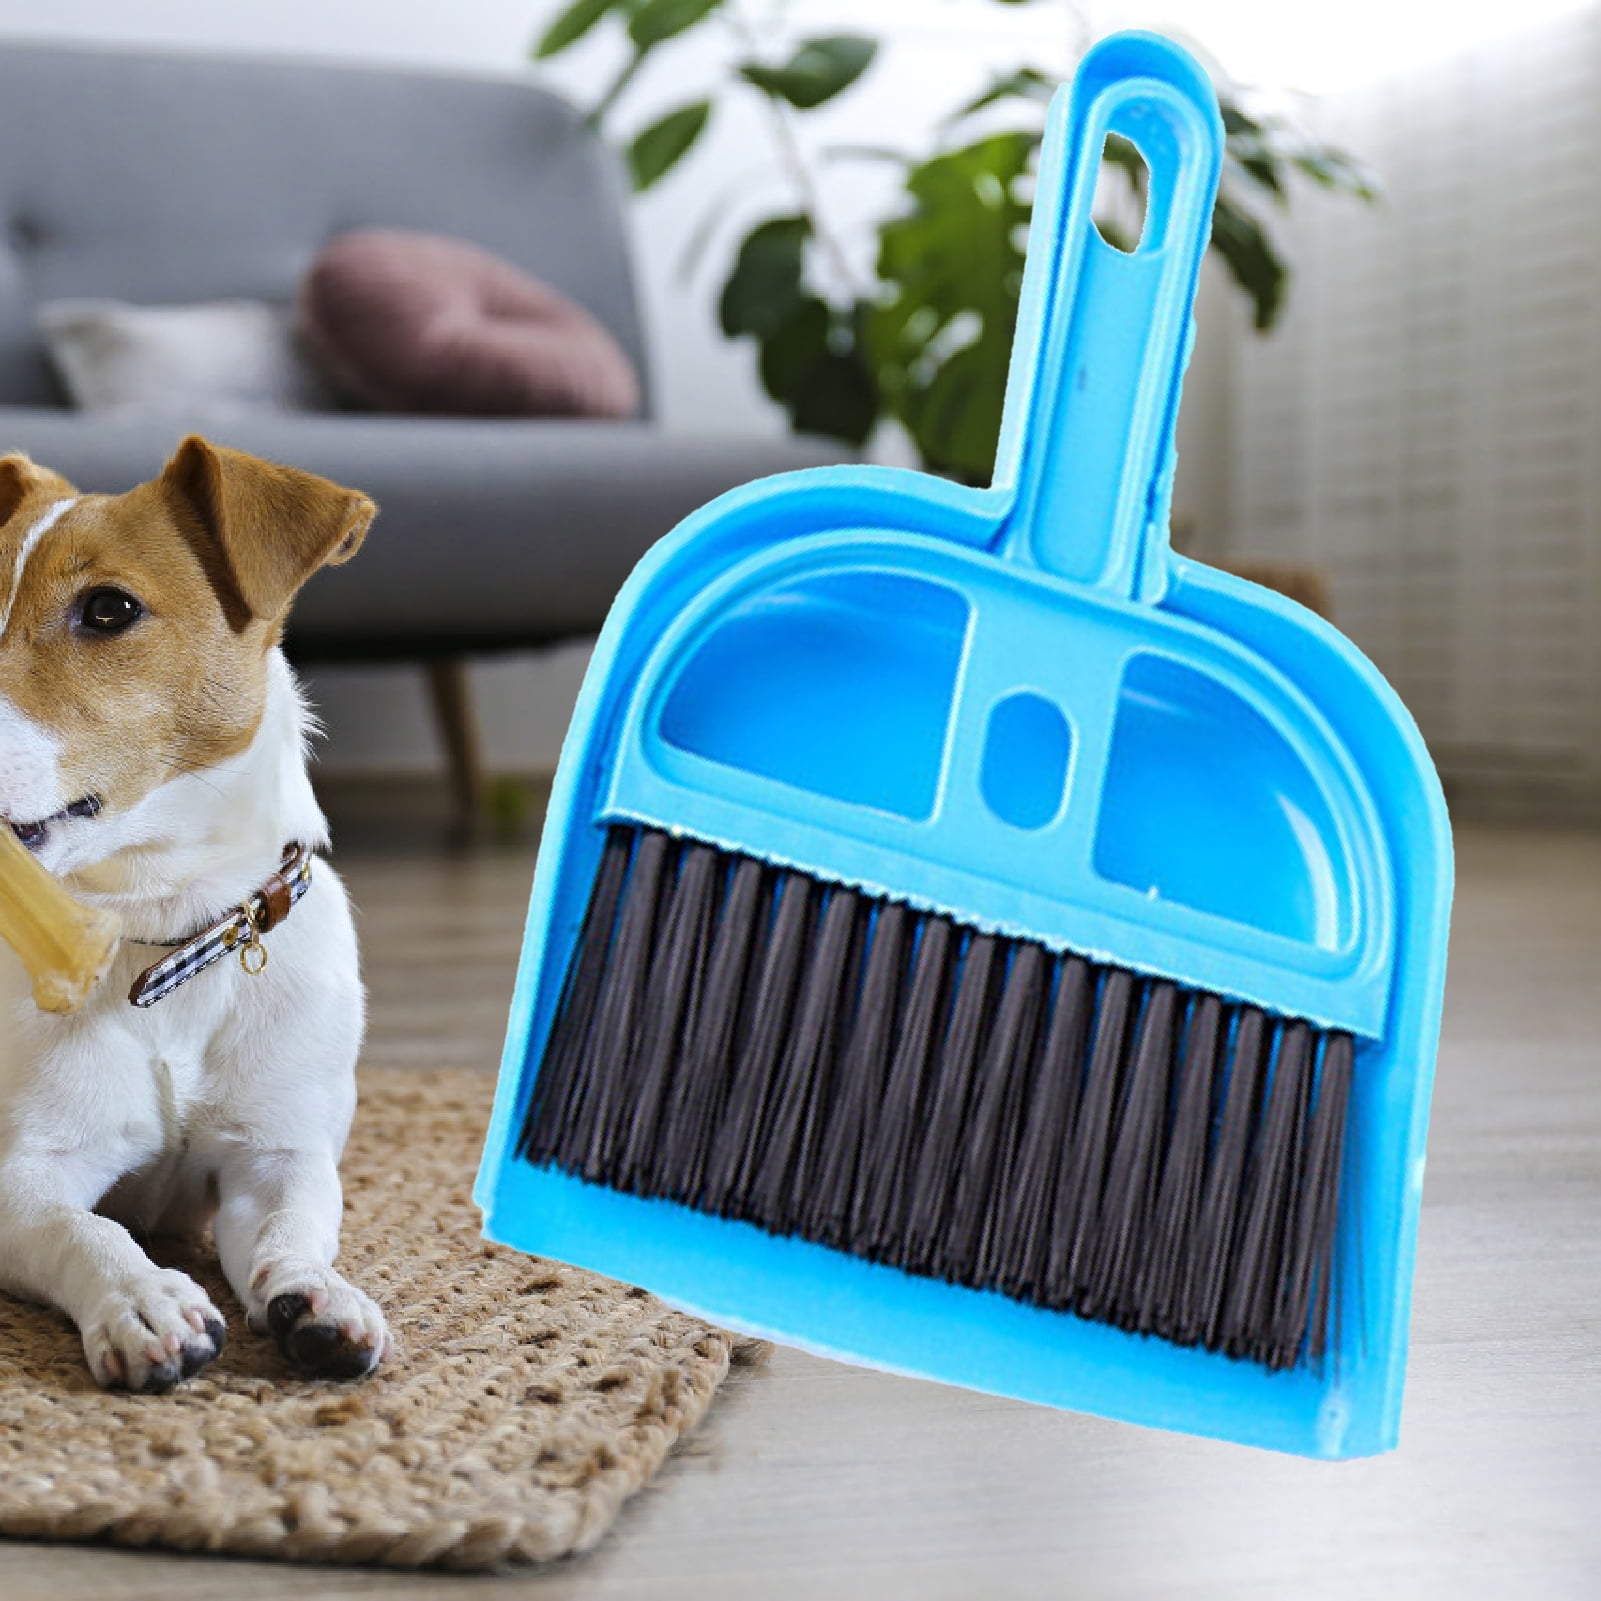 Set of 2 Mini Plastic Dustpan Brush Set Desk Cleaner Mini Broom & Dustpan Cleaning Tool for Computer Keyboard Pet Cage Waste Cleaning Office Desk 